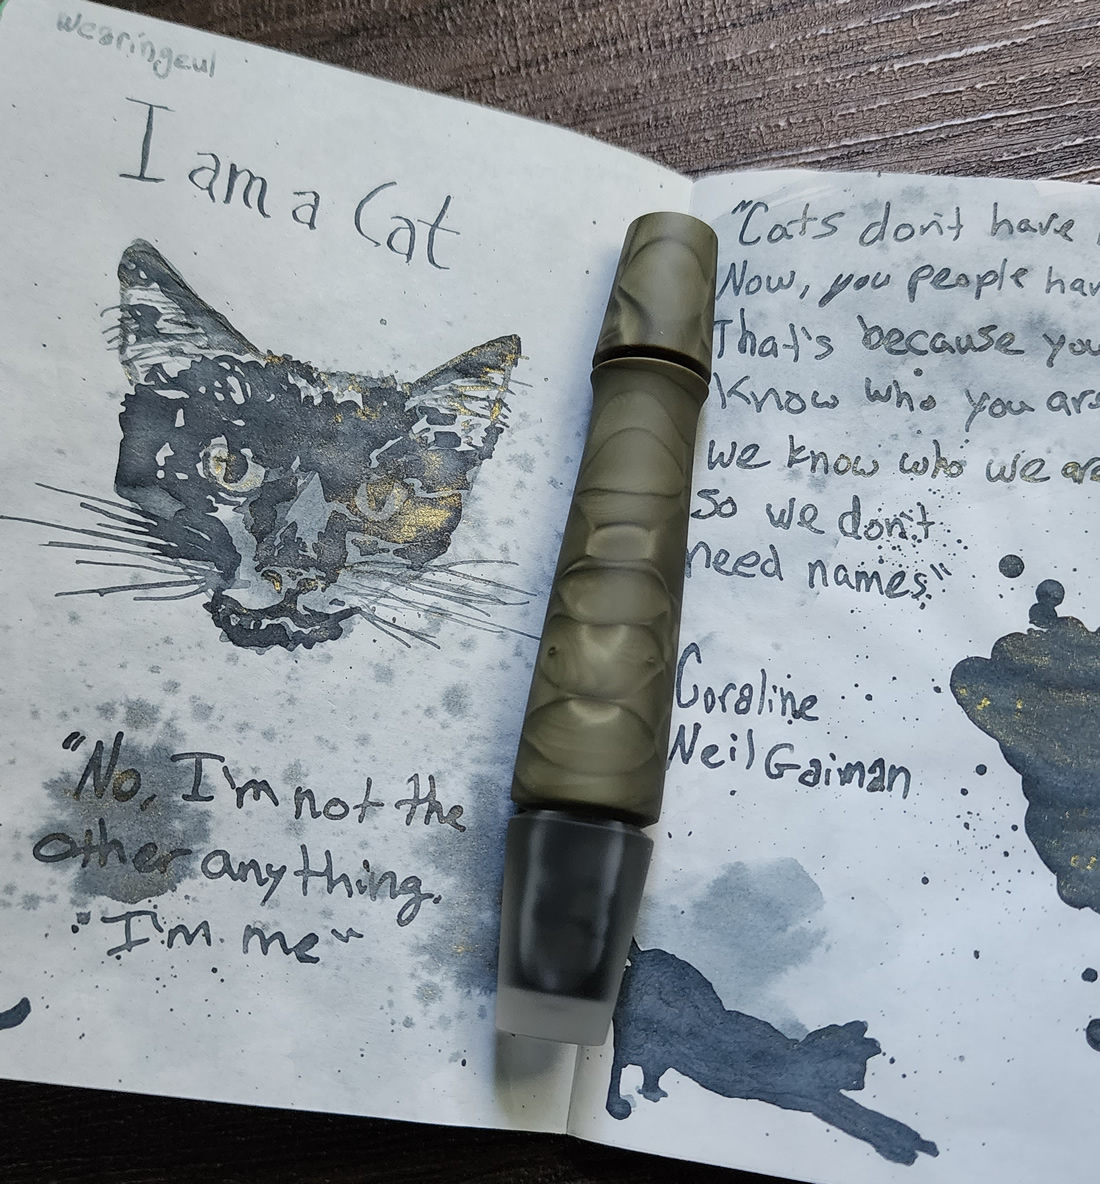 A short, curvy fountain pen with a small stopper-style cap in army green swirl and transparent resin with a matte finish, resting on an open notebook with the I am a Cat ink and sketch of Boo.